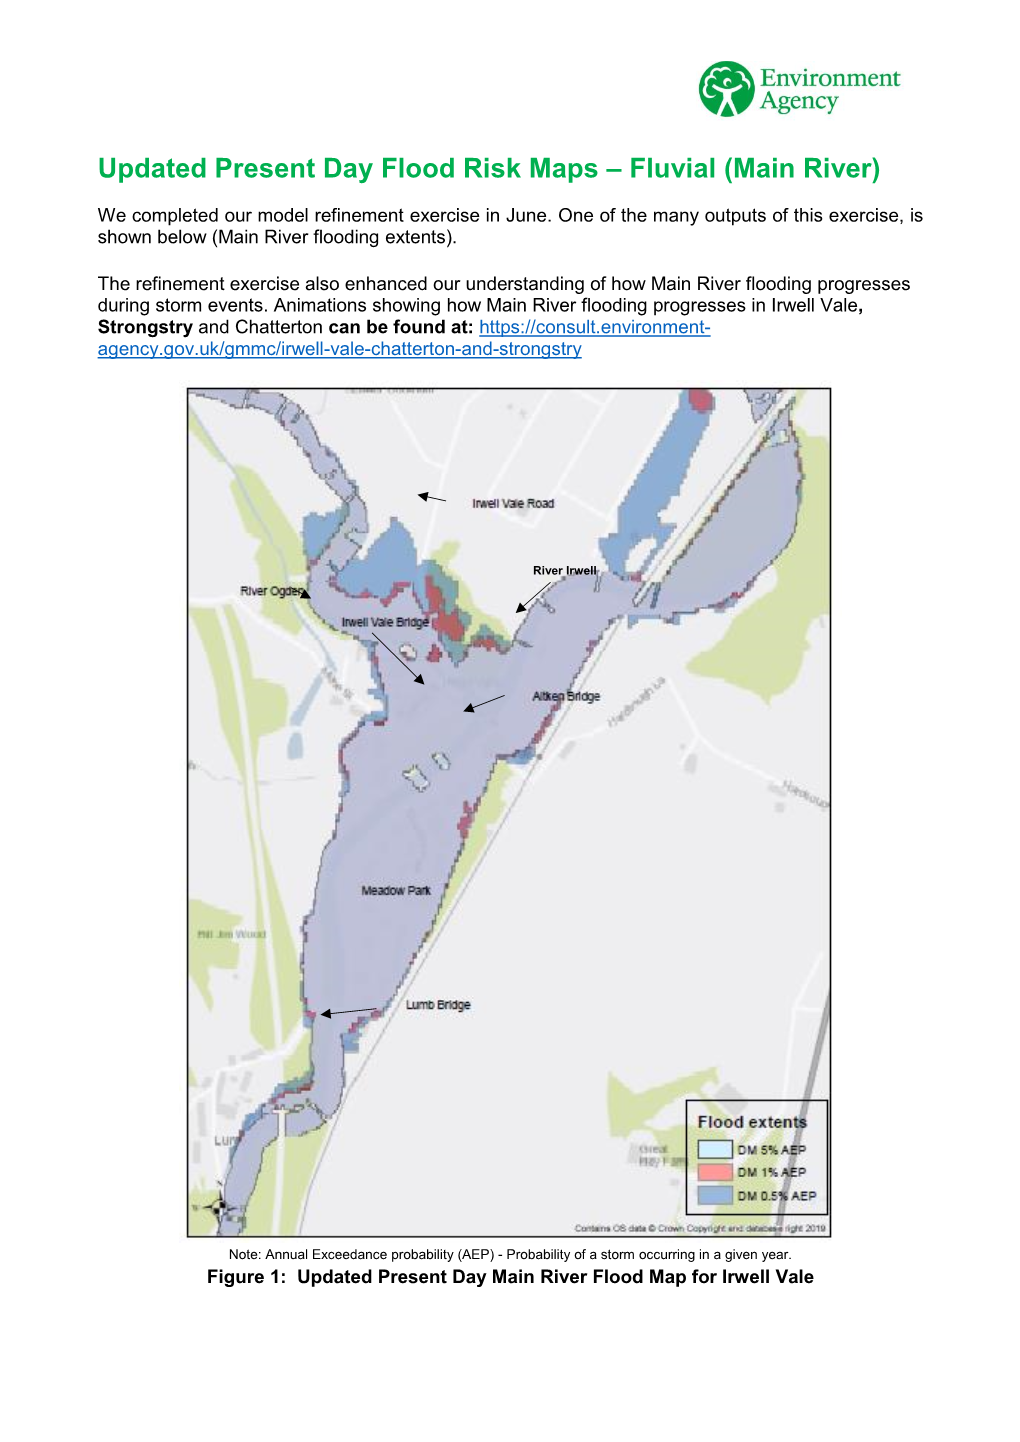 Updated Present Day Flood Risk Maps – Fluvial (Main River)